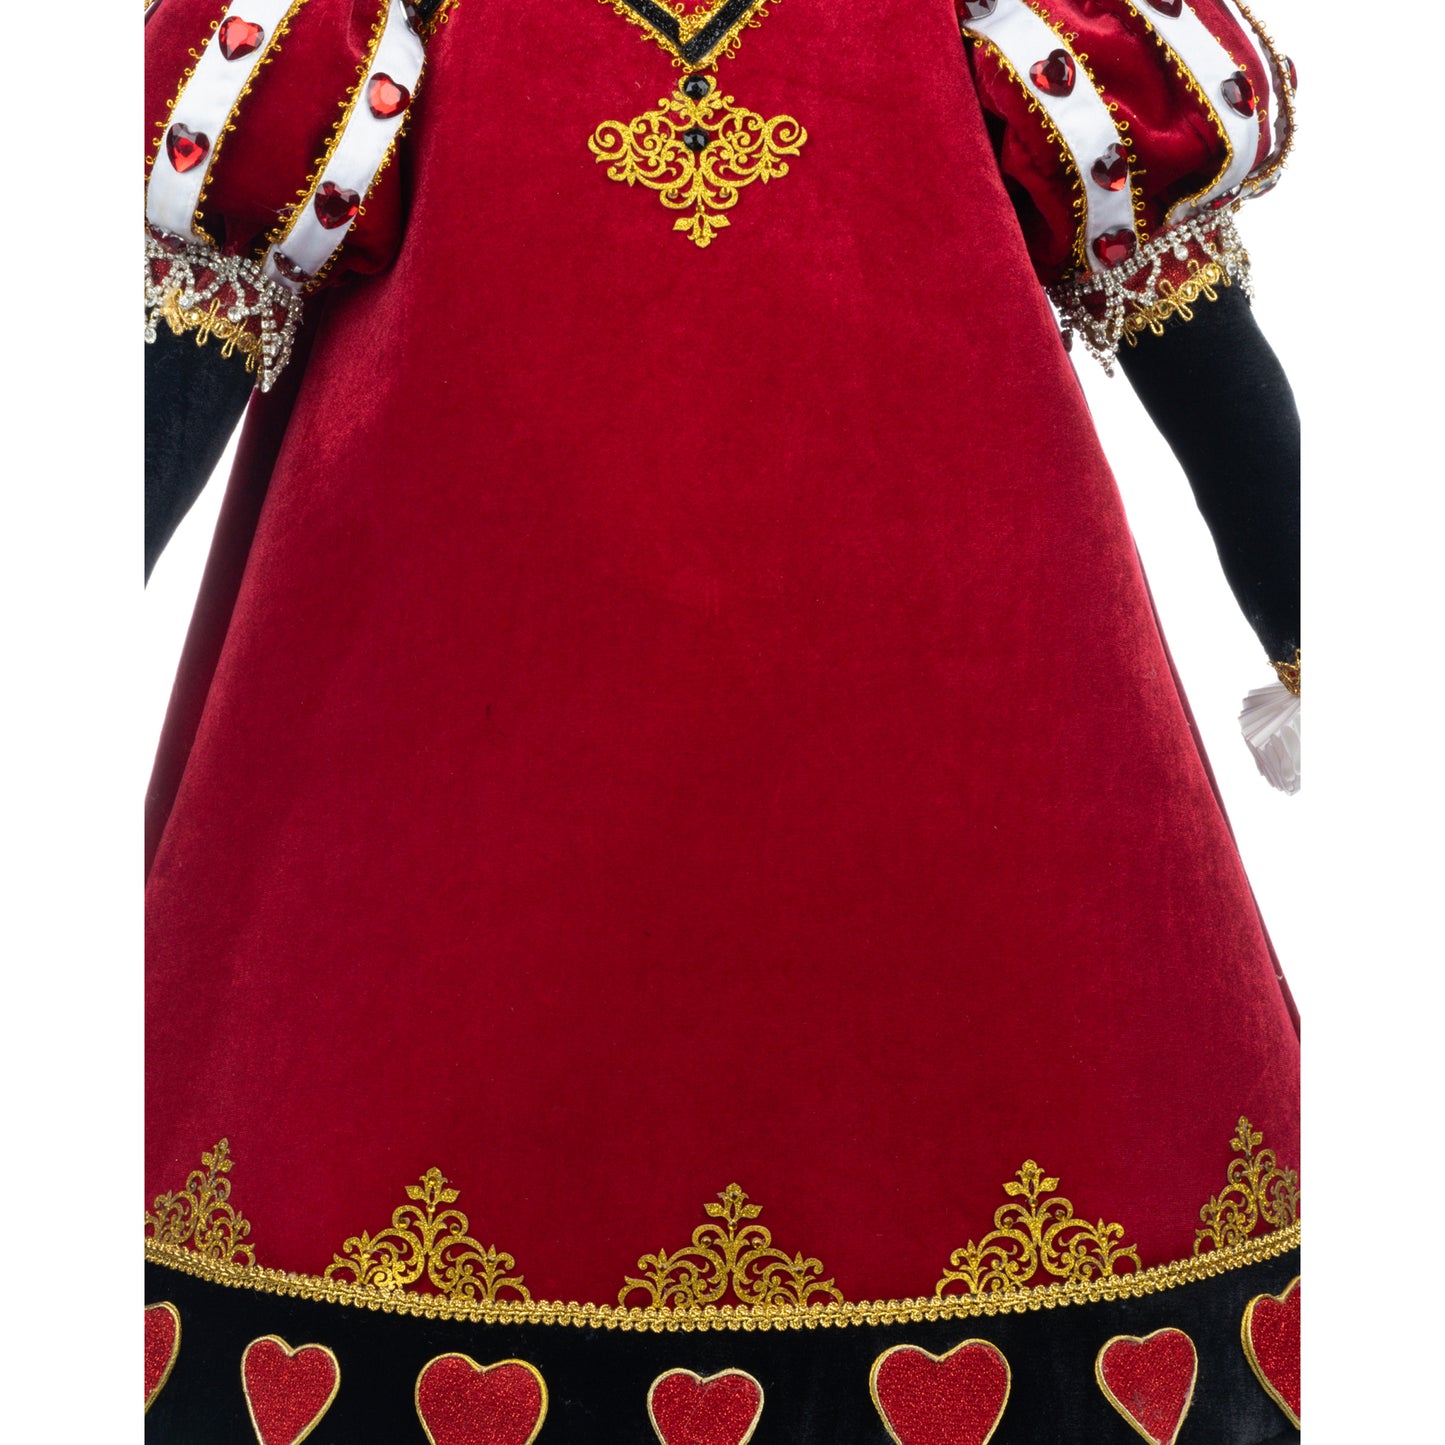 Katherine's Collection LIMITED EDITION Hearts & Wonderland King Of Hearts Doll, 32-Inch